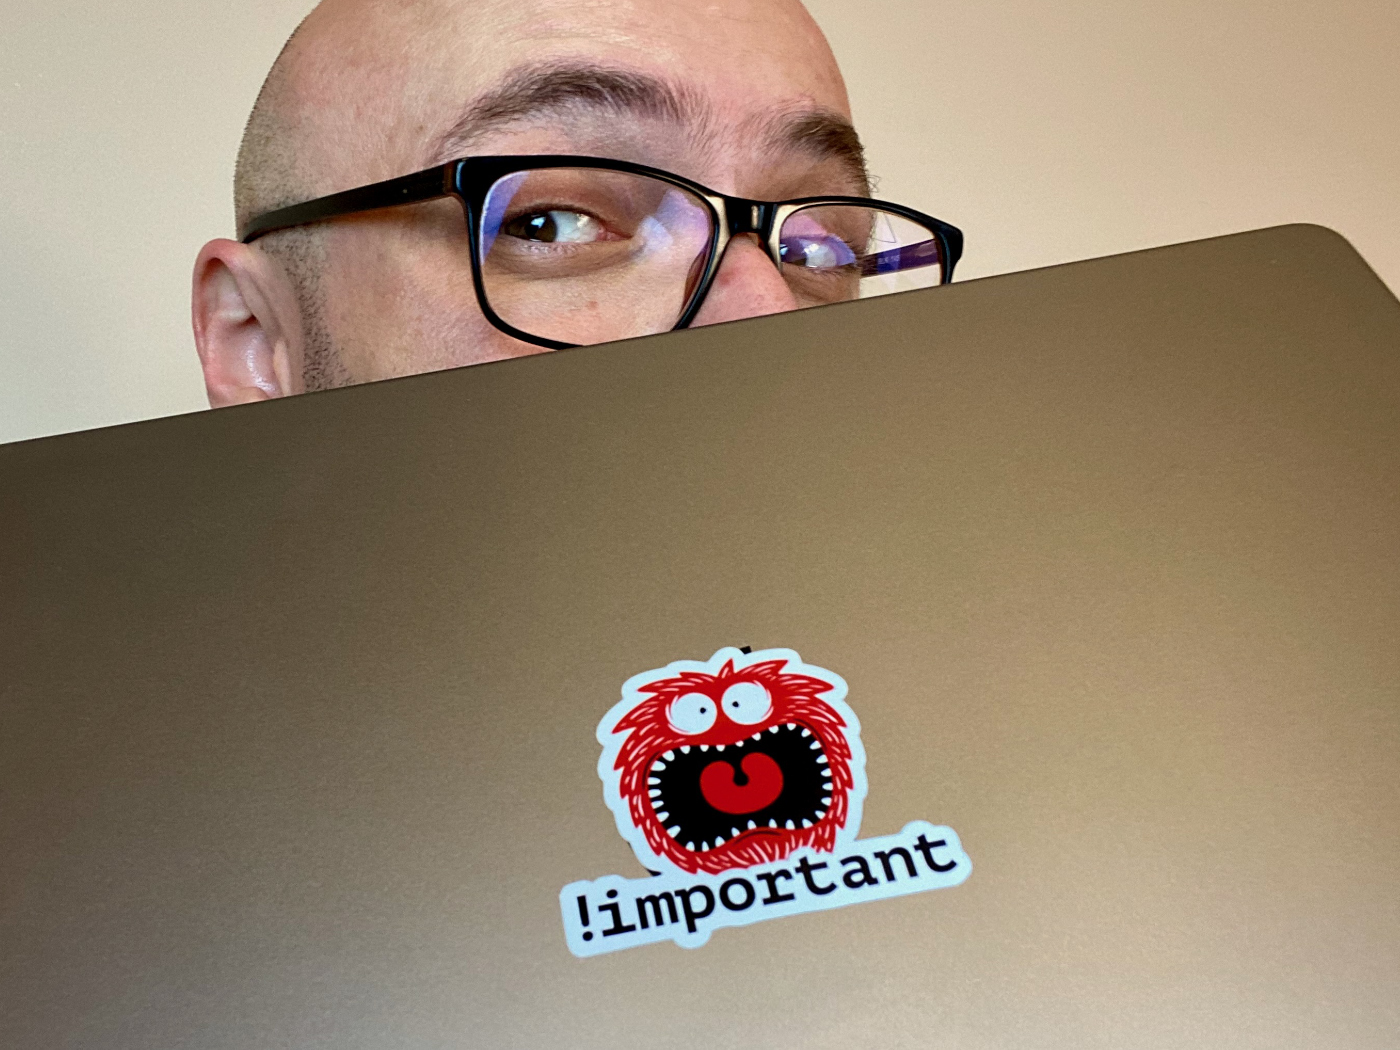 Zoran Jambor holding his laptop with the sticker !important in the middle.